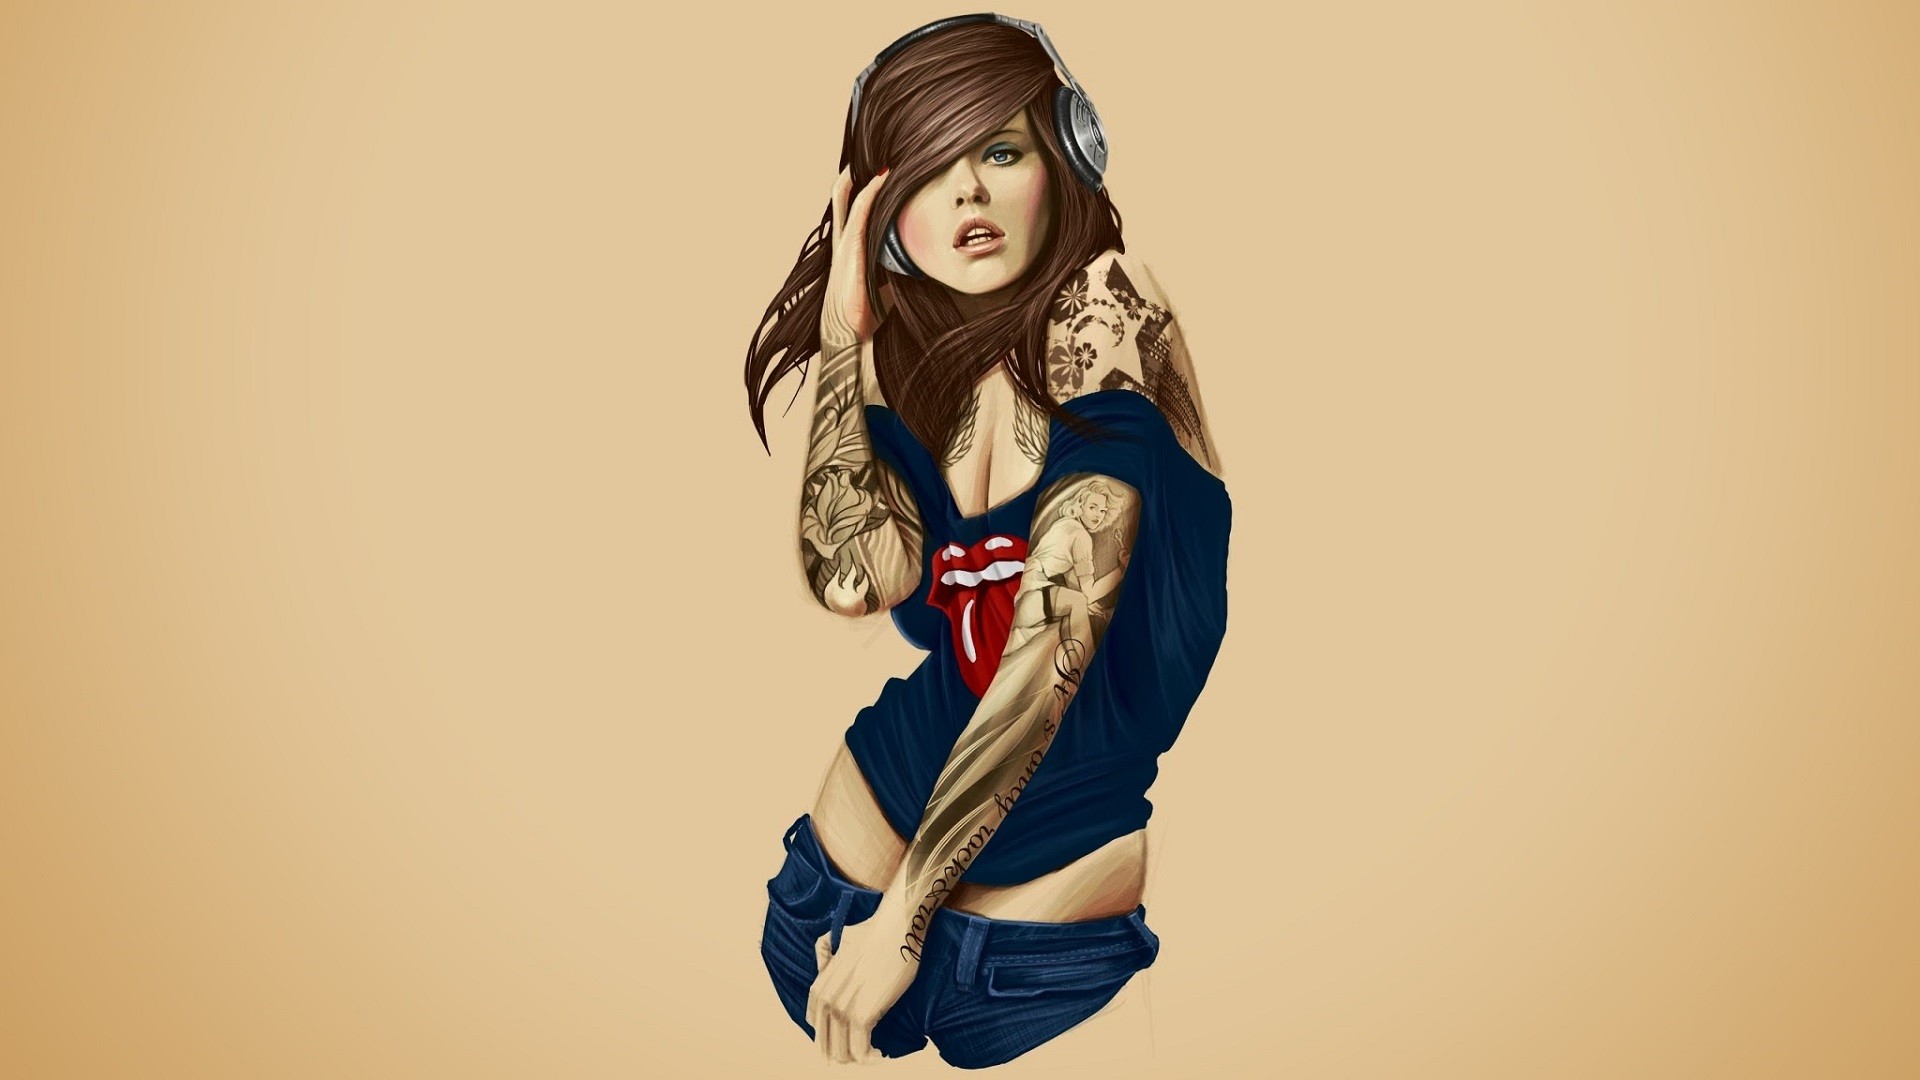 General 1920x1080 women tattoo Rolling Stones headphones inked girls simple background brunette artwork long hair rolling stones t-shirt open mouth blue clothing T-shirt looking at viewer